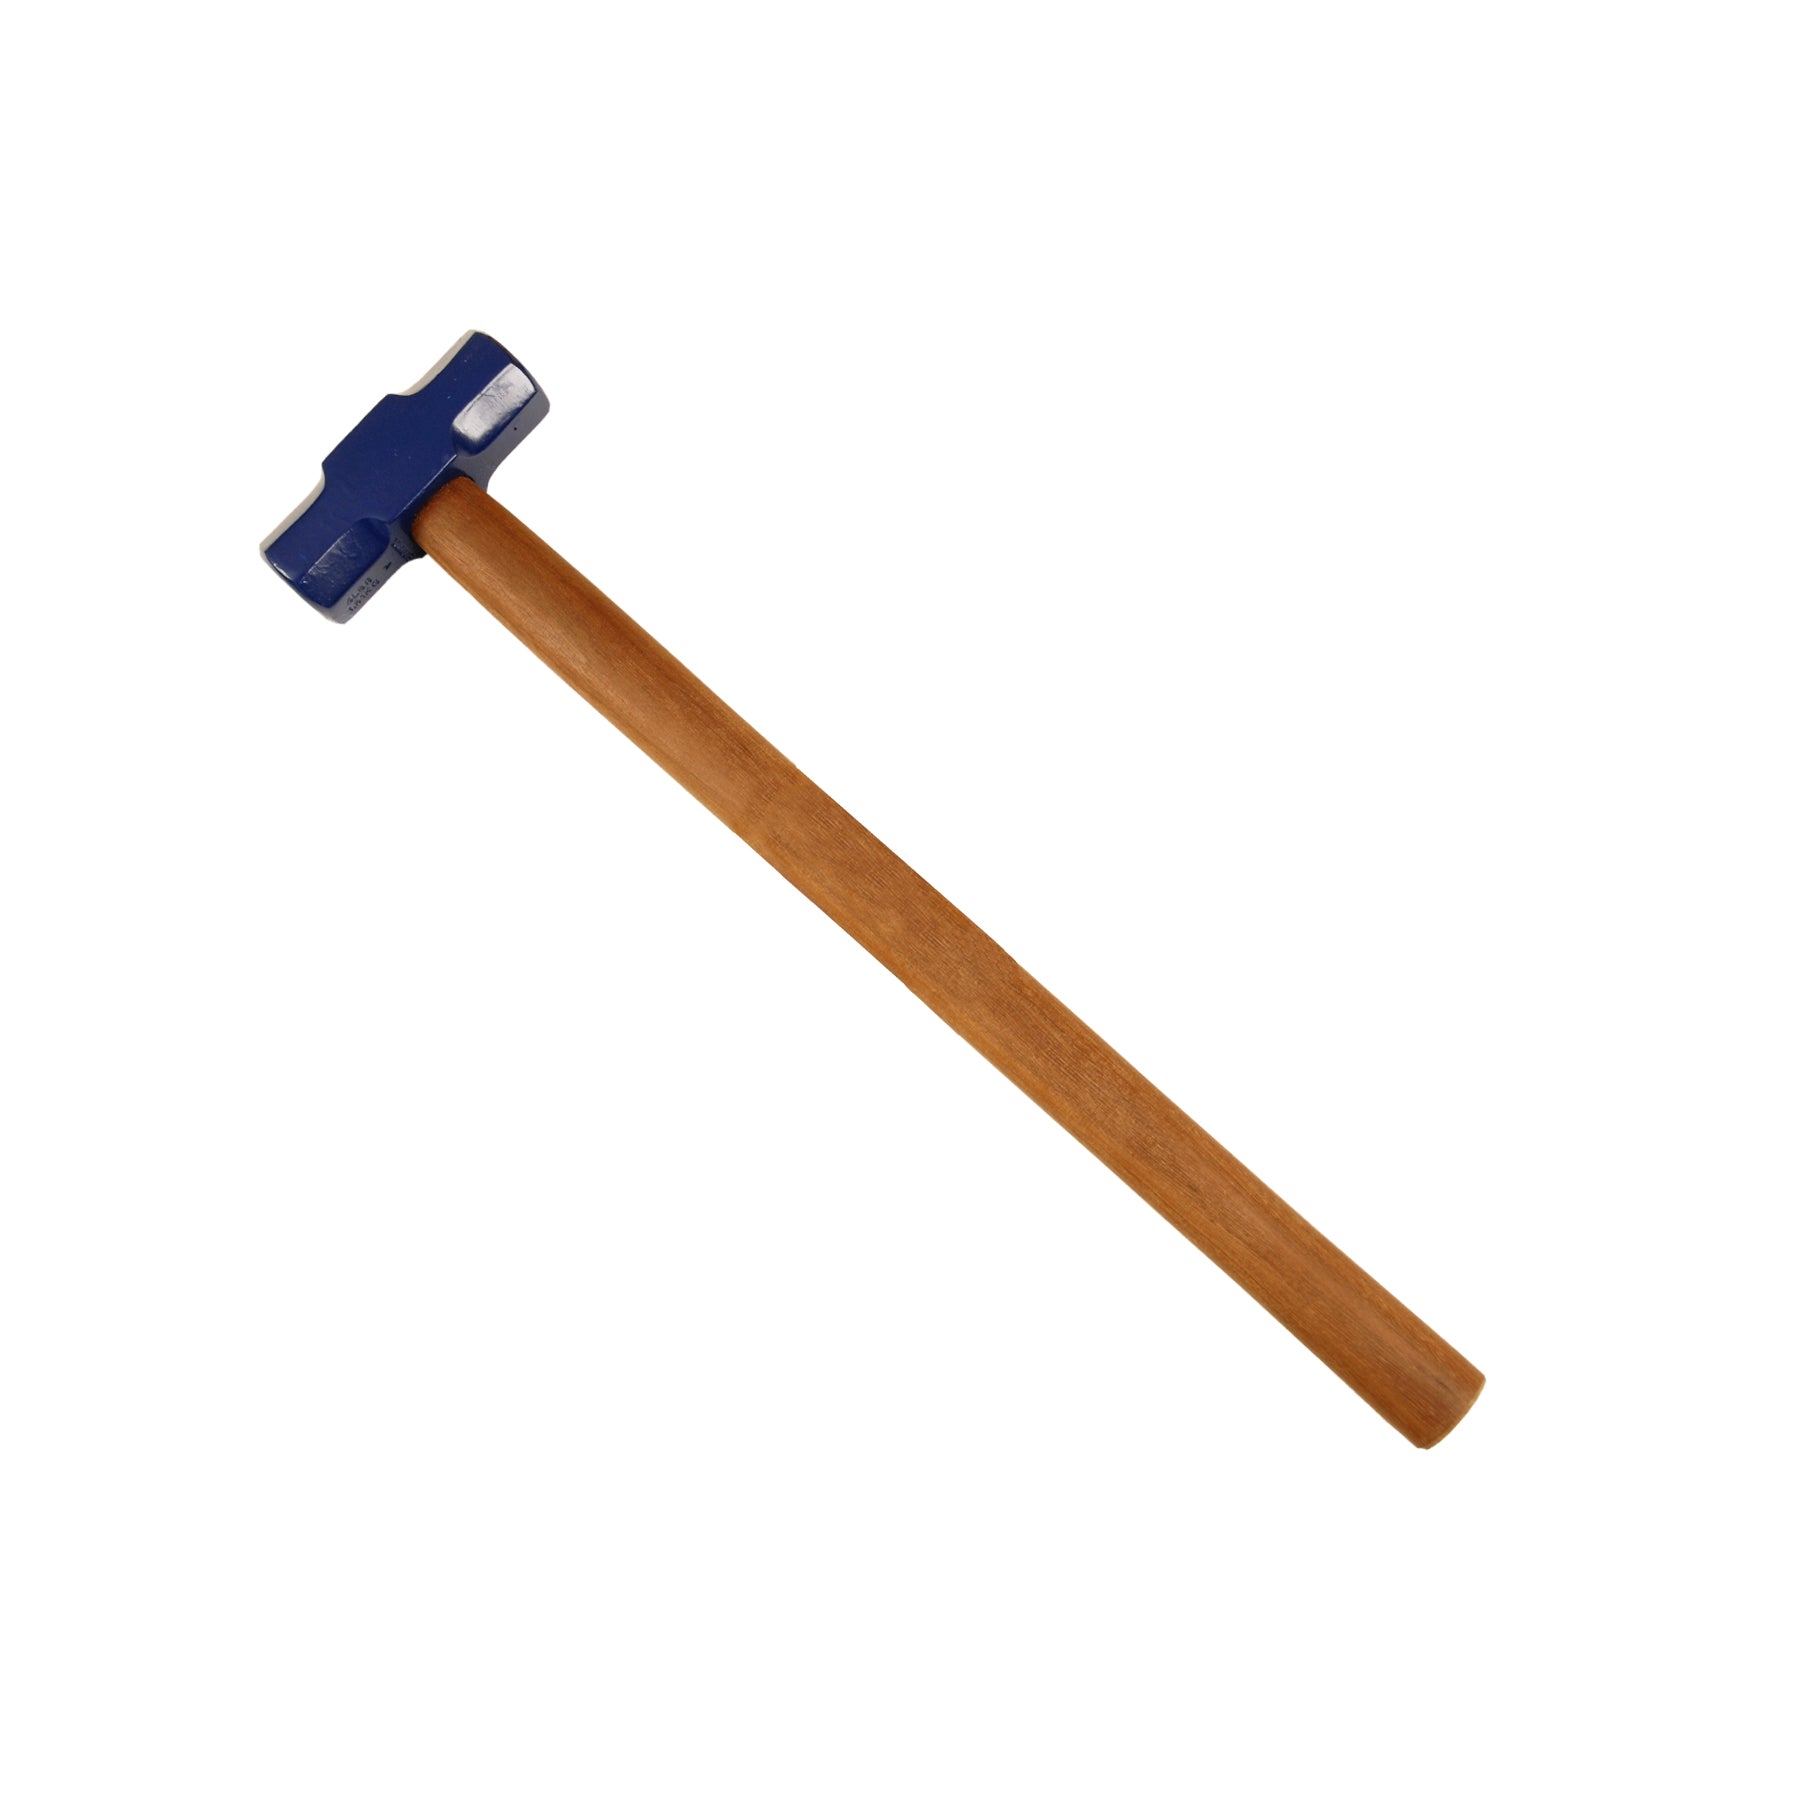 7lb Sledge Hammer with Hardwood Handle 5HSH07 by Mumme